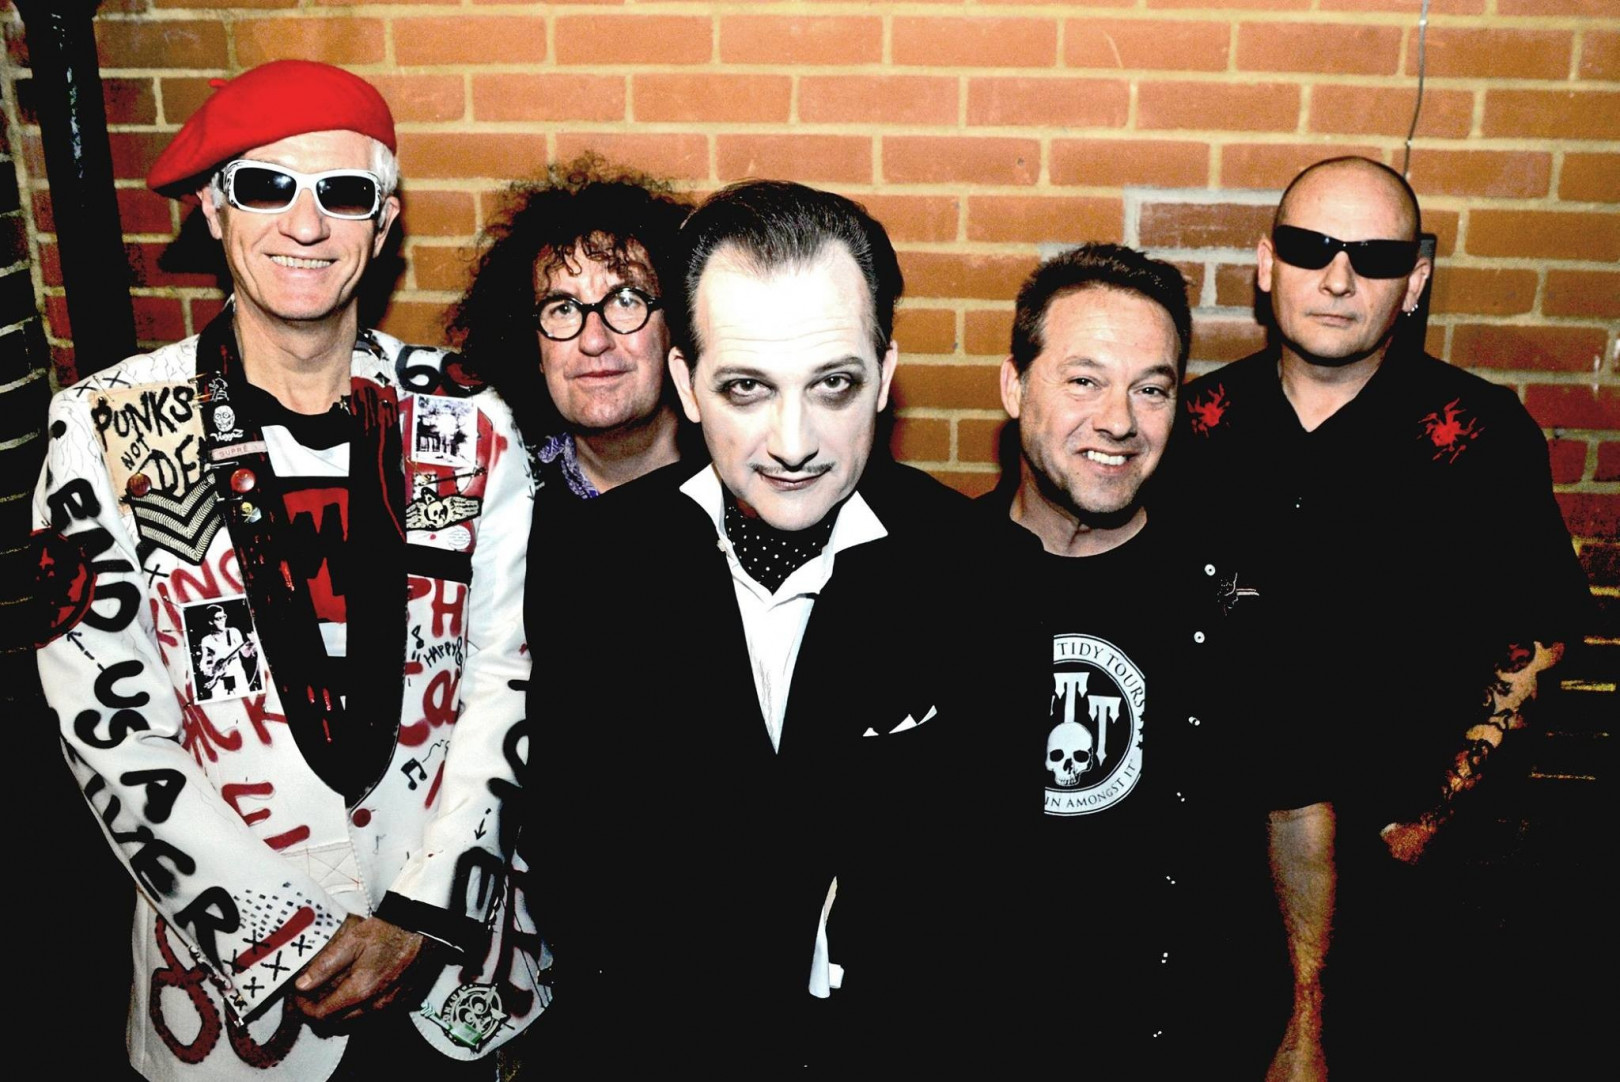 The Damned announce European tour dates